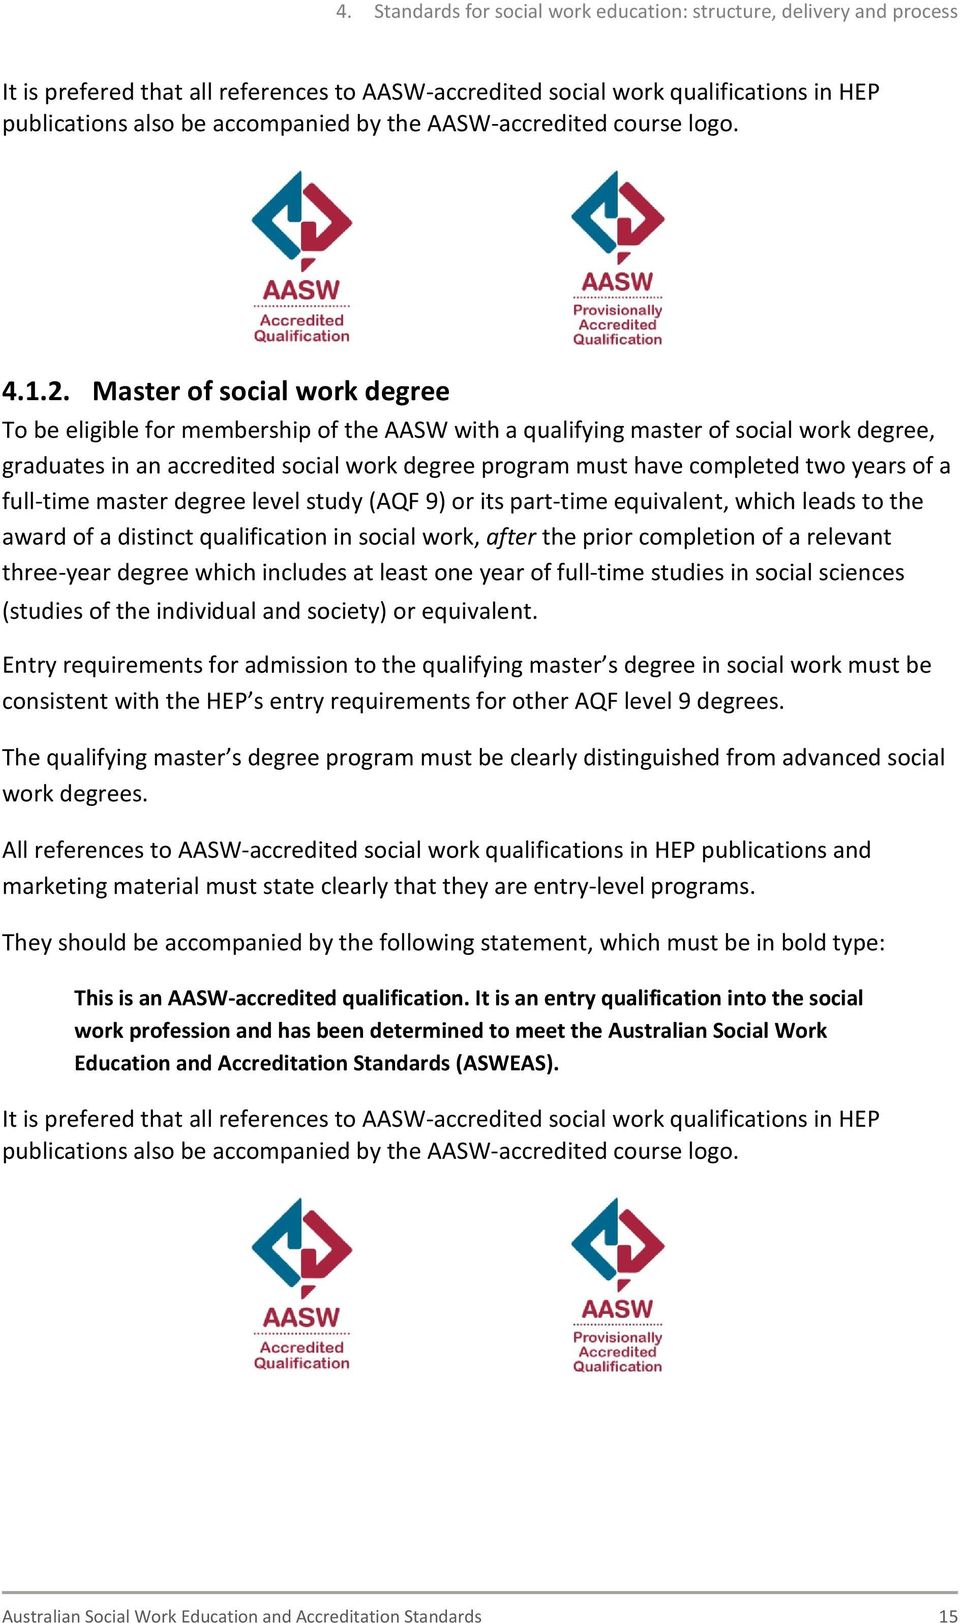 Master of social work degree To be eligible for membership of the AASW with a qualifying master of social work degree, graduates in an accredited social work degree program must have completed two